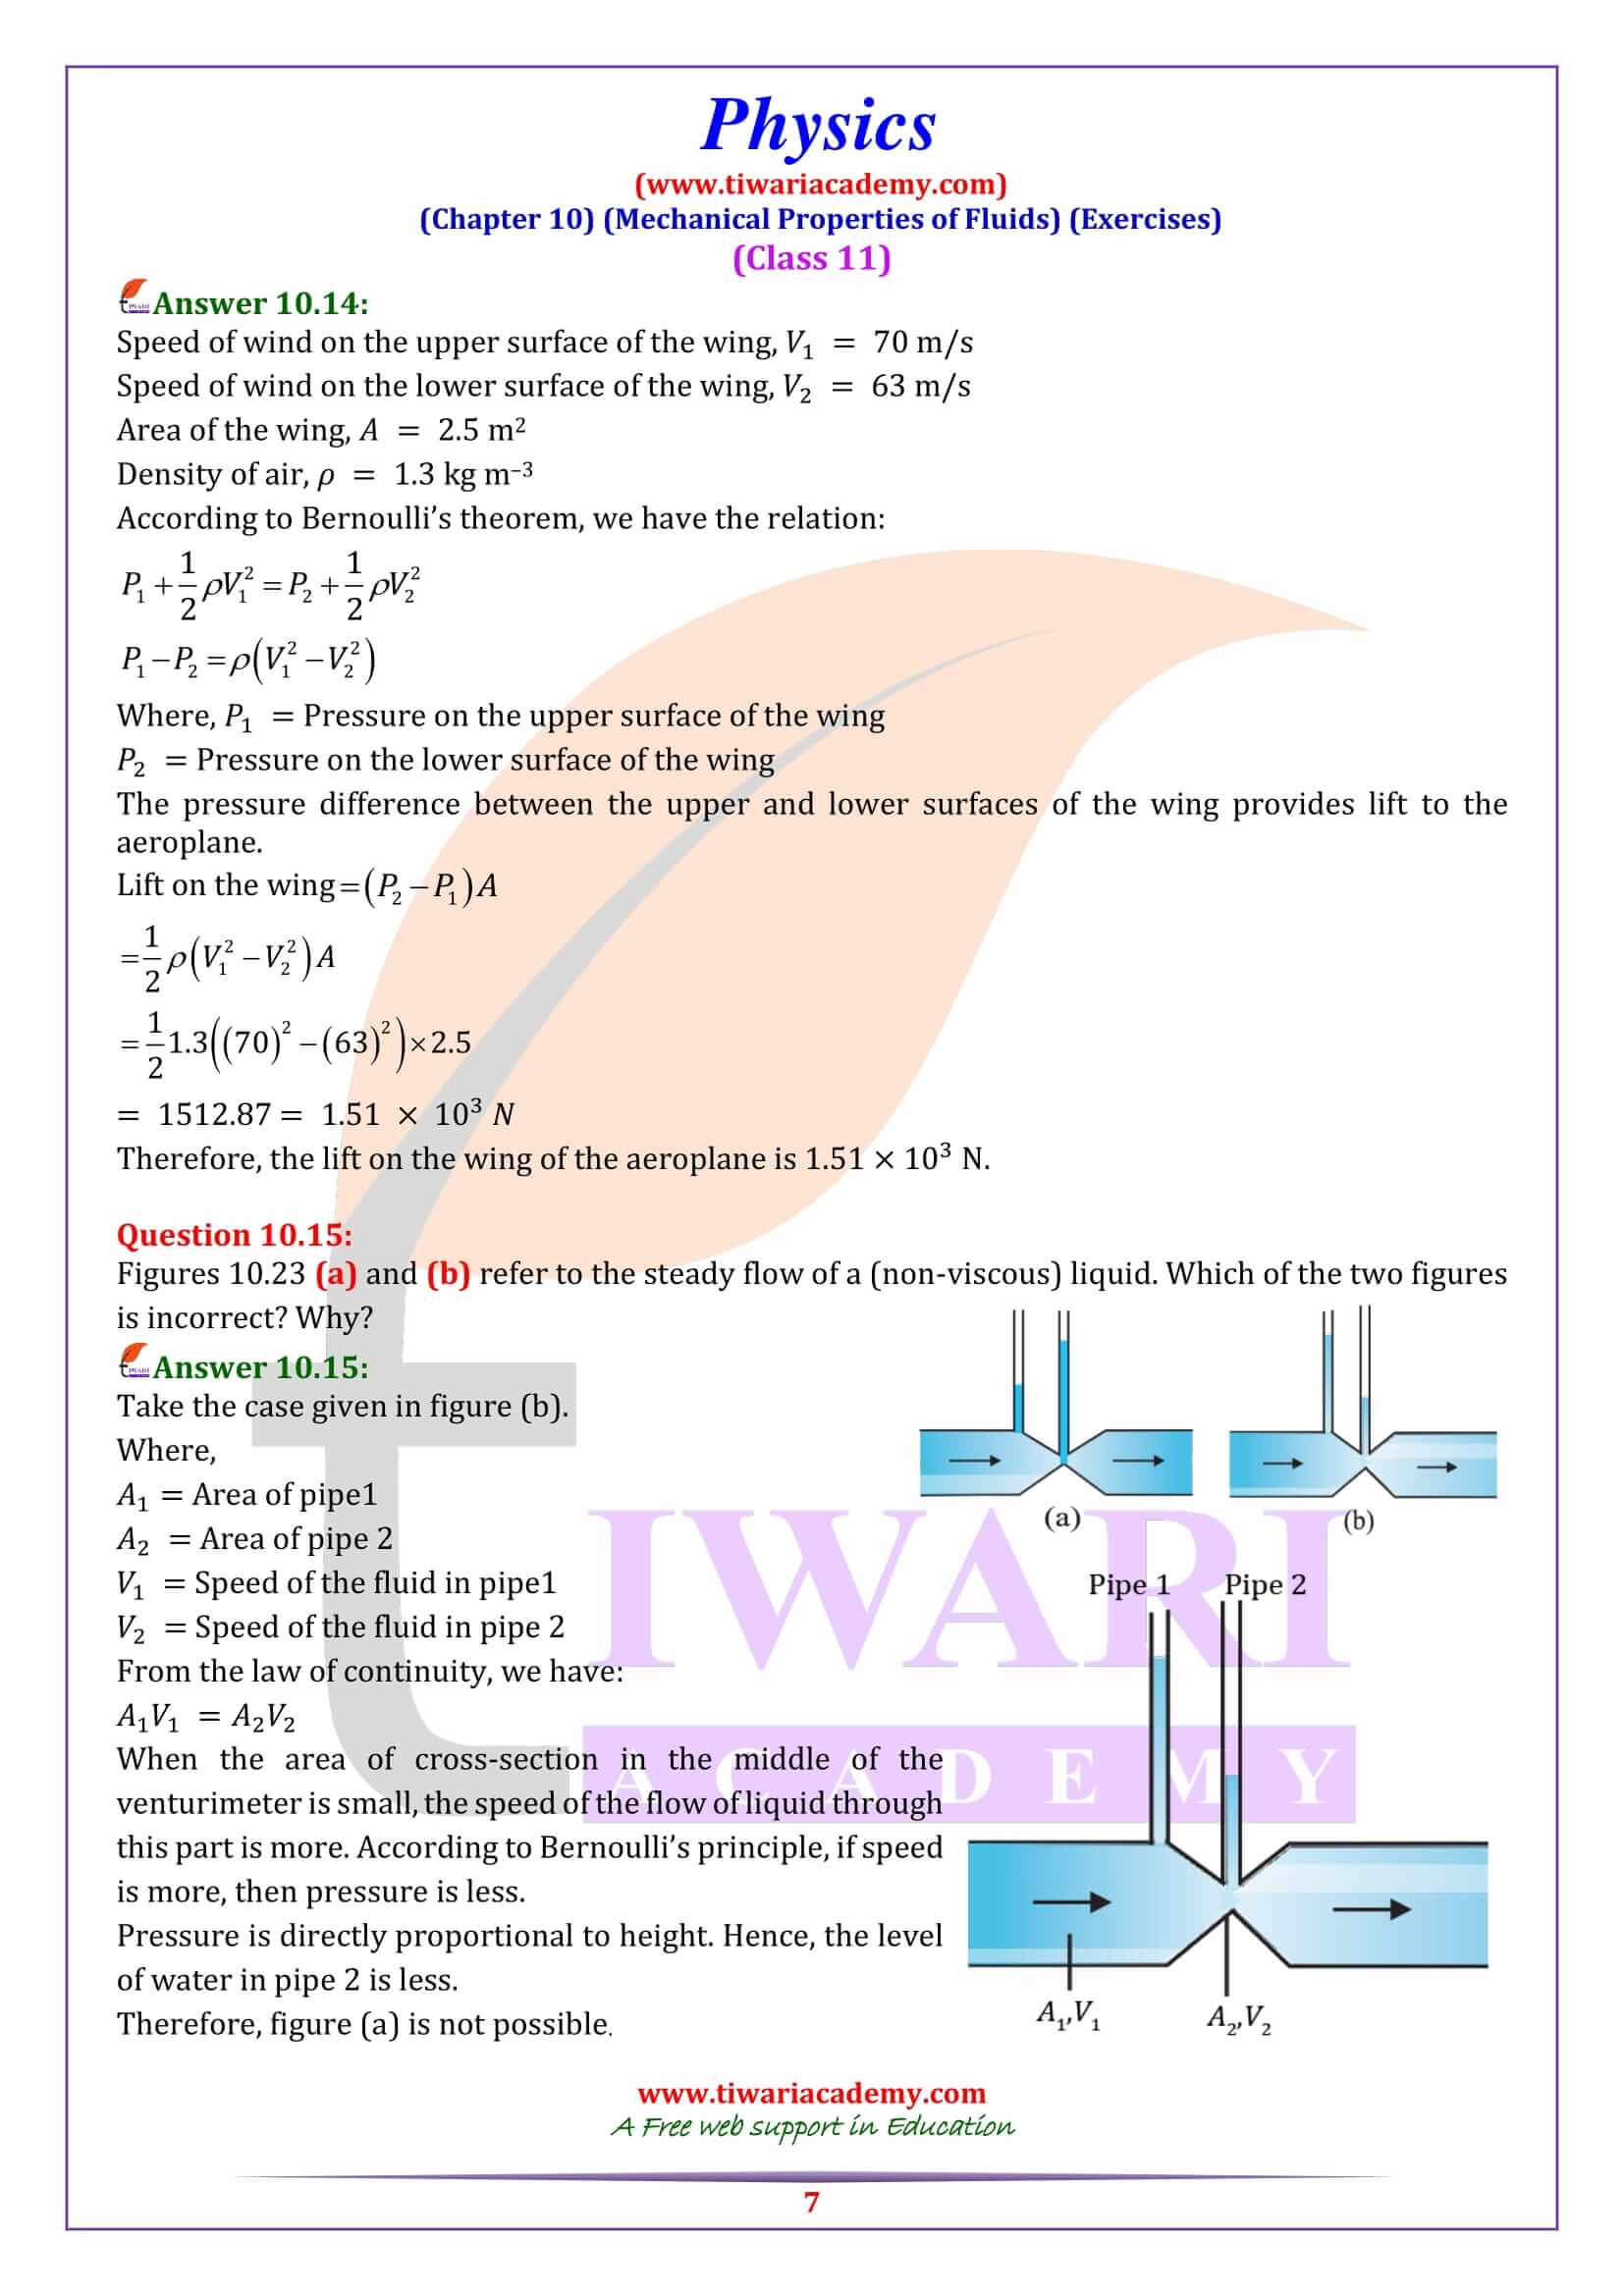 Class 11 Physics Chapter 10 free solutions download